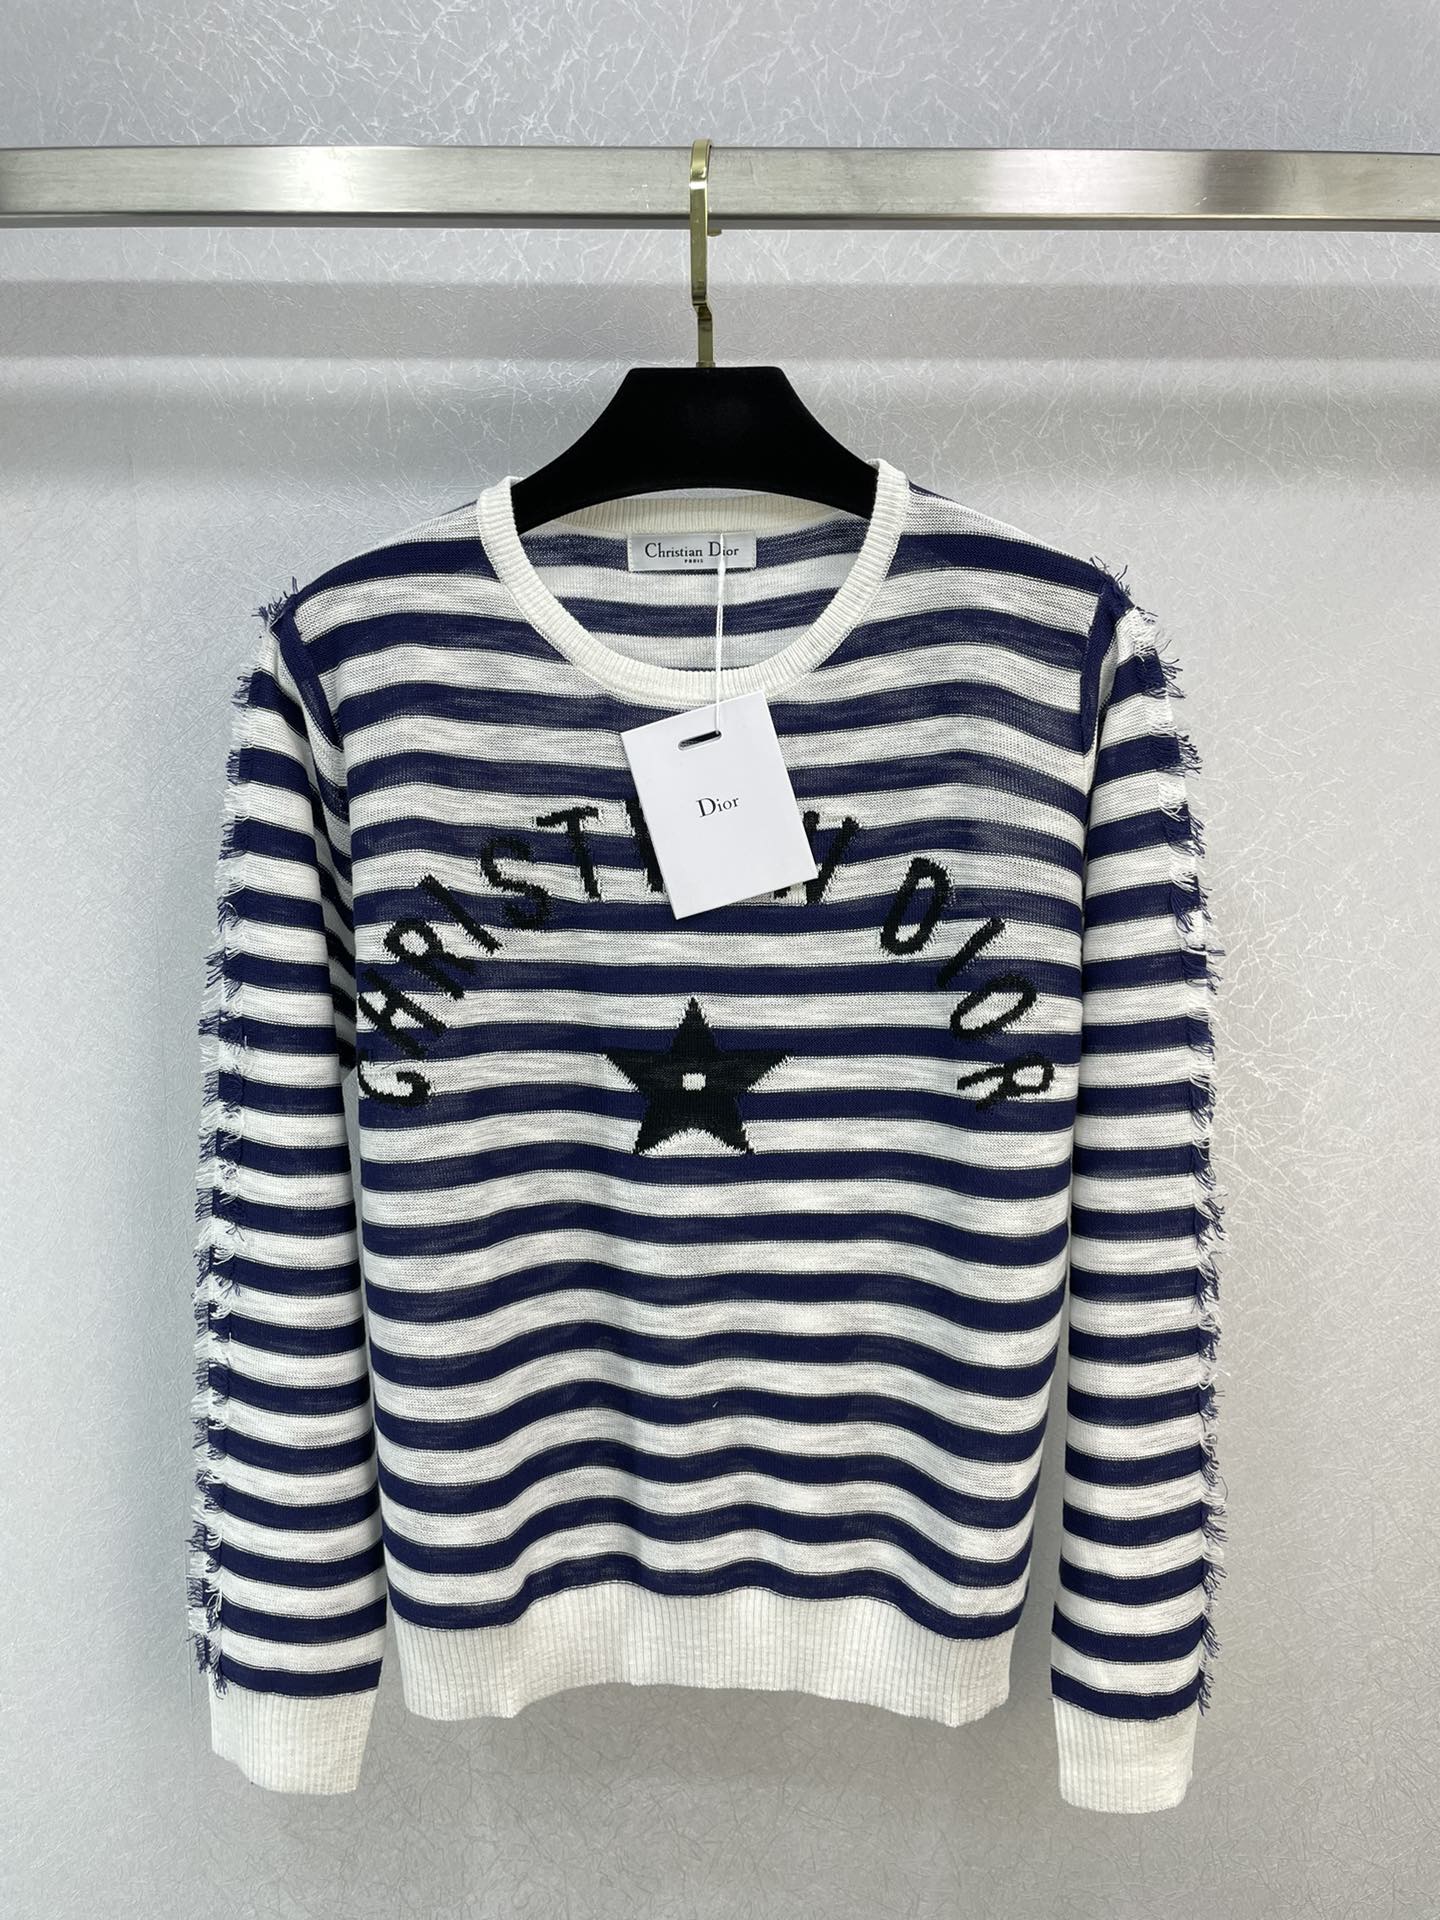 1:1
 Dior Clothing Sweatshirts High Quality Customize
 Blue White Spring Collection Long Sleeve